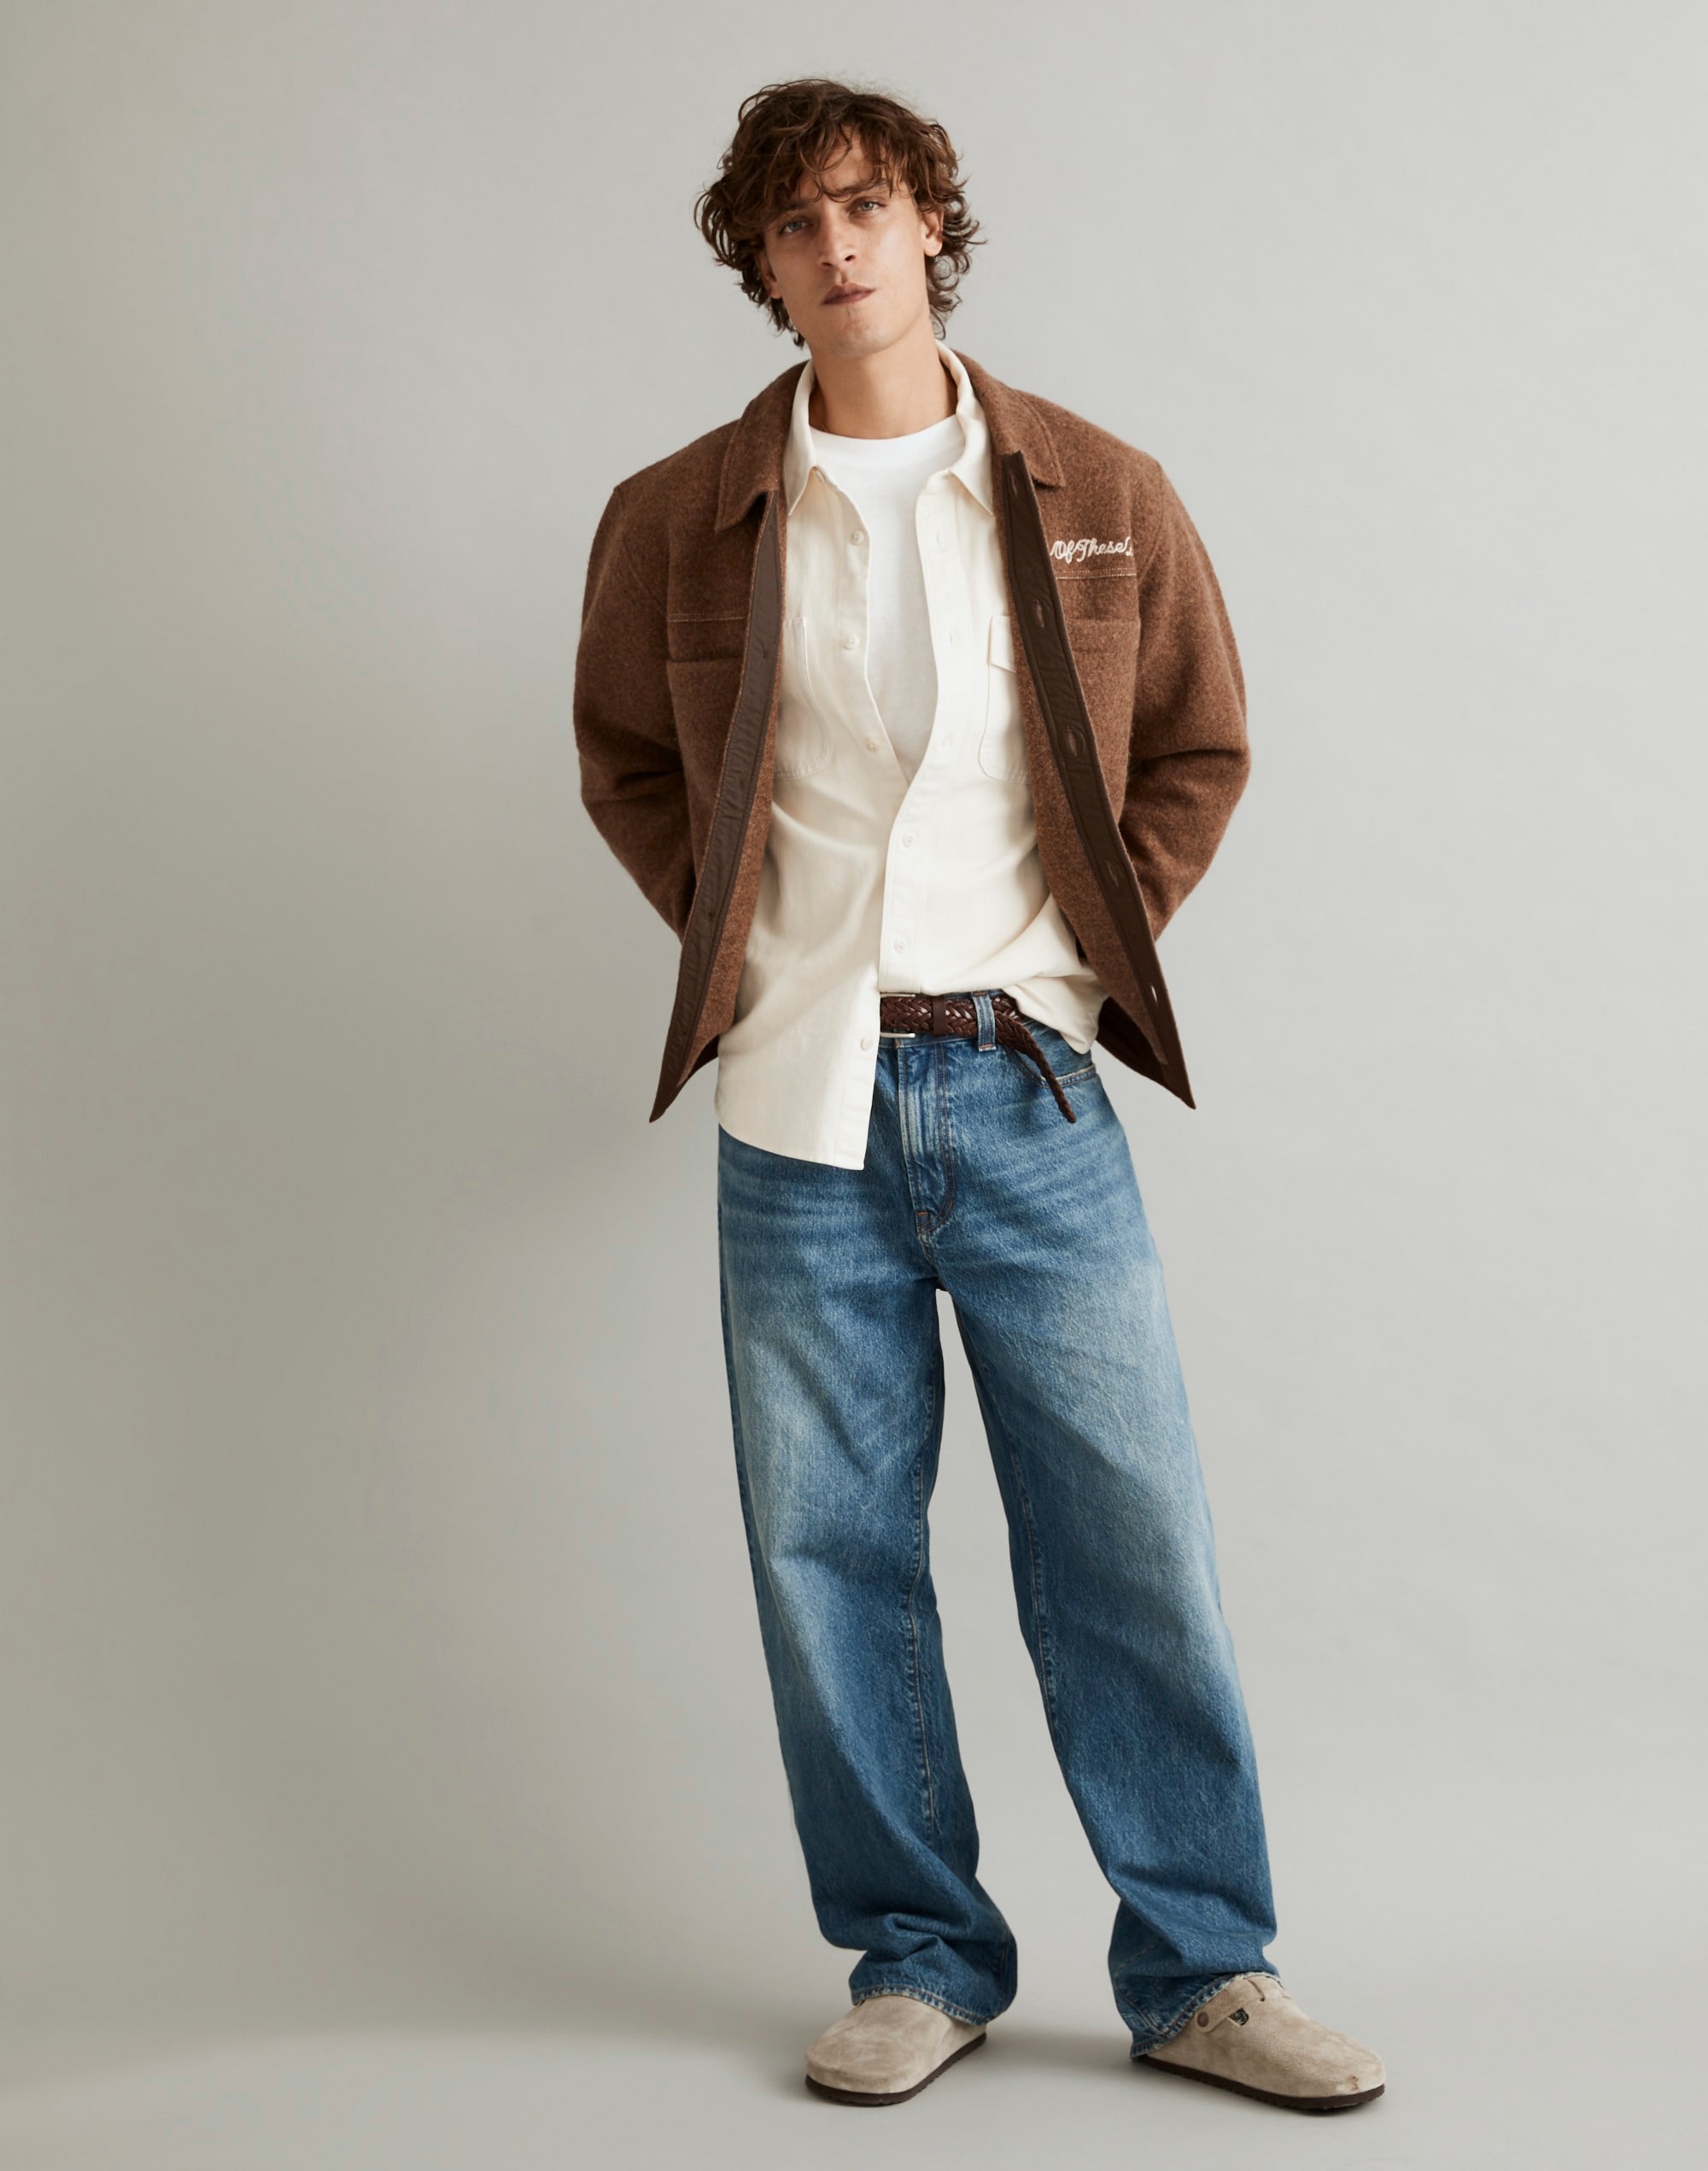 Madewell by One of These Days Shirt-Jacket